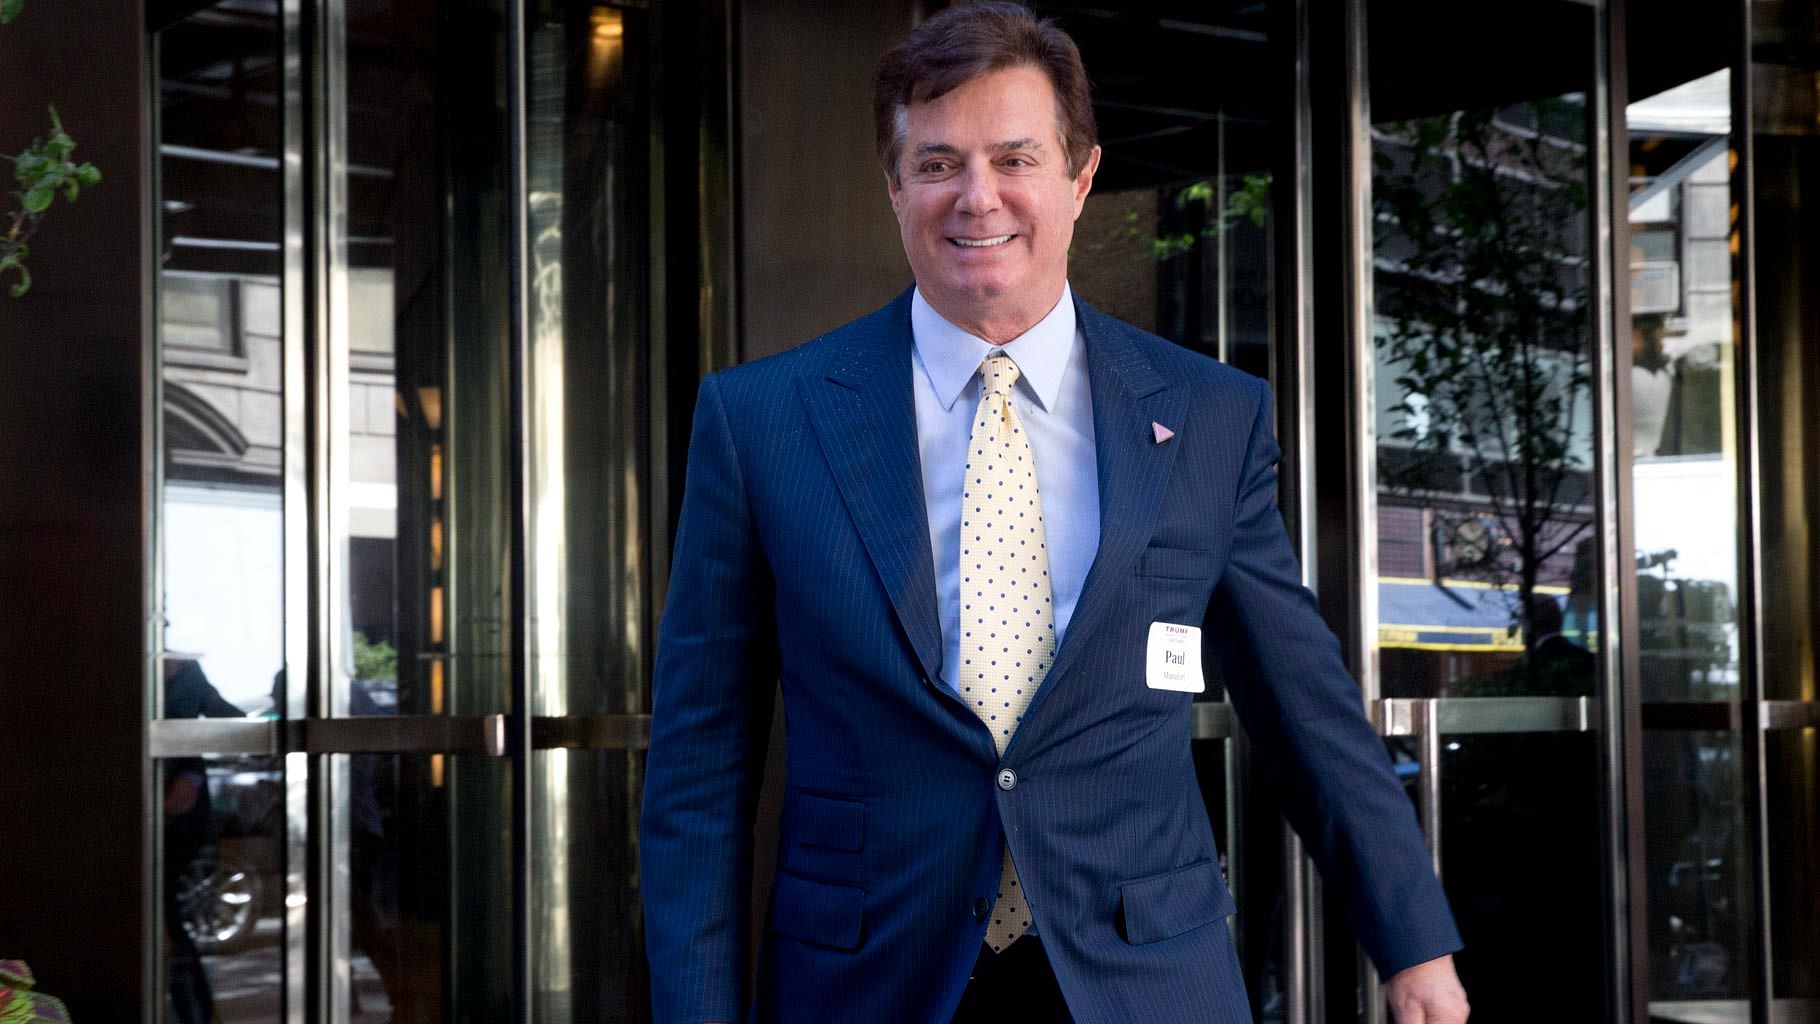  Paul Manafort was sentenced to 47 months in prison on Thursday for tax crimes and bank fraud.